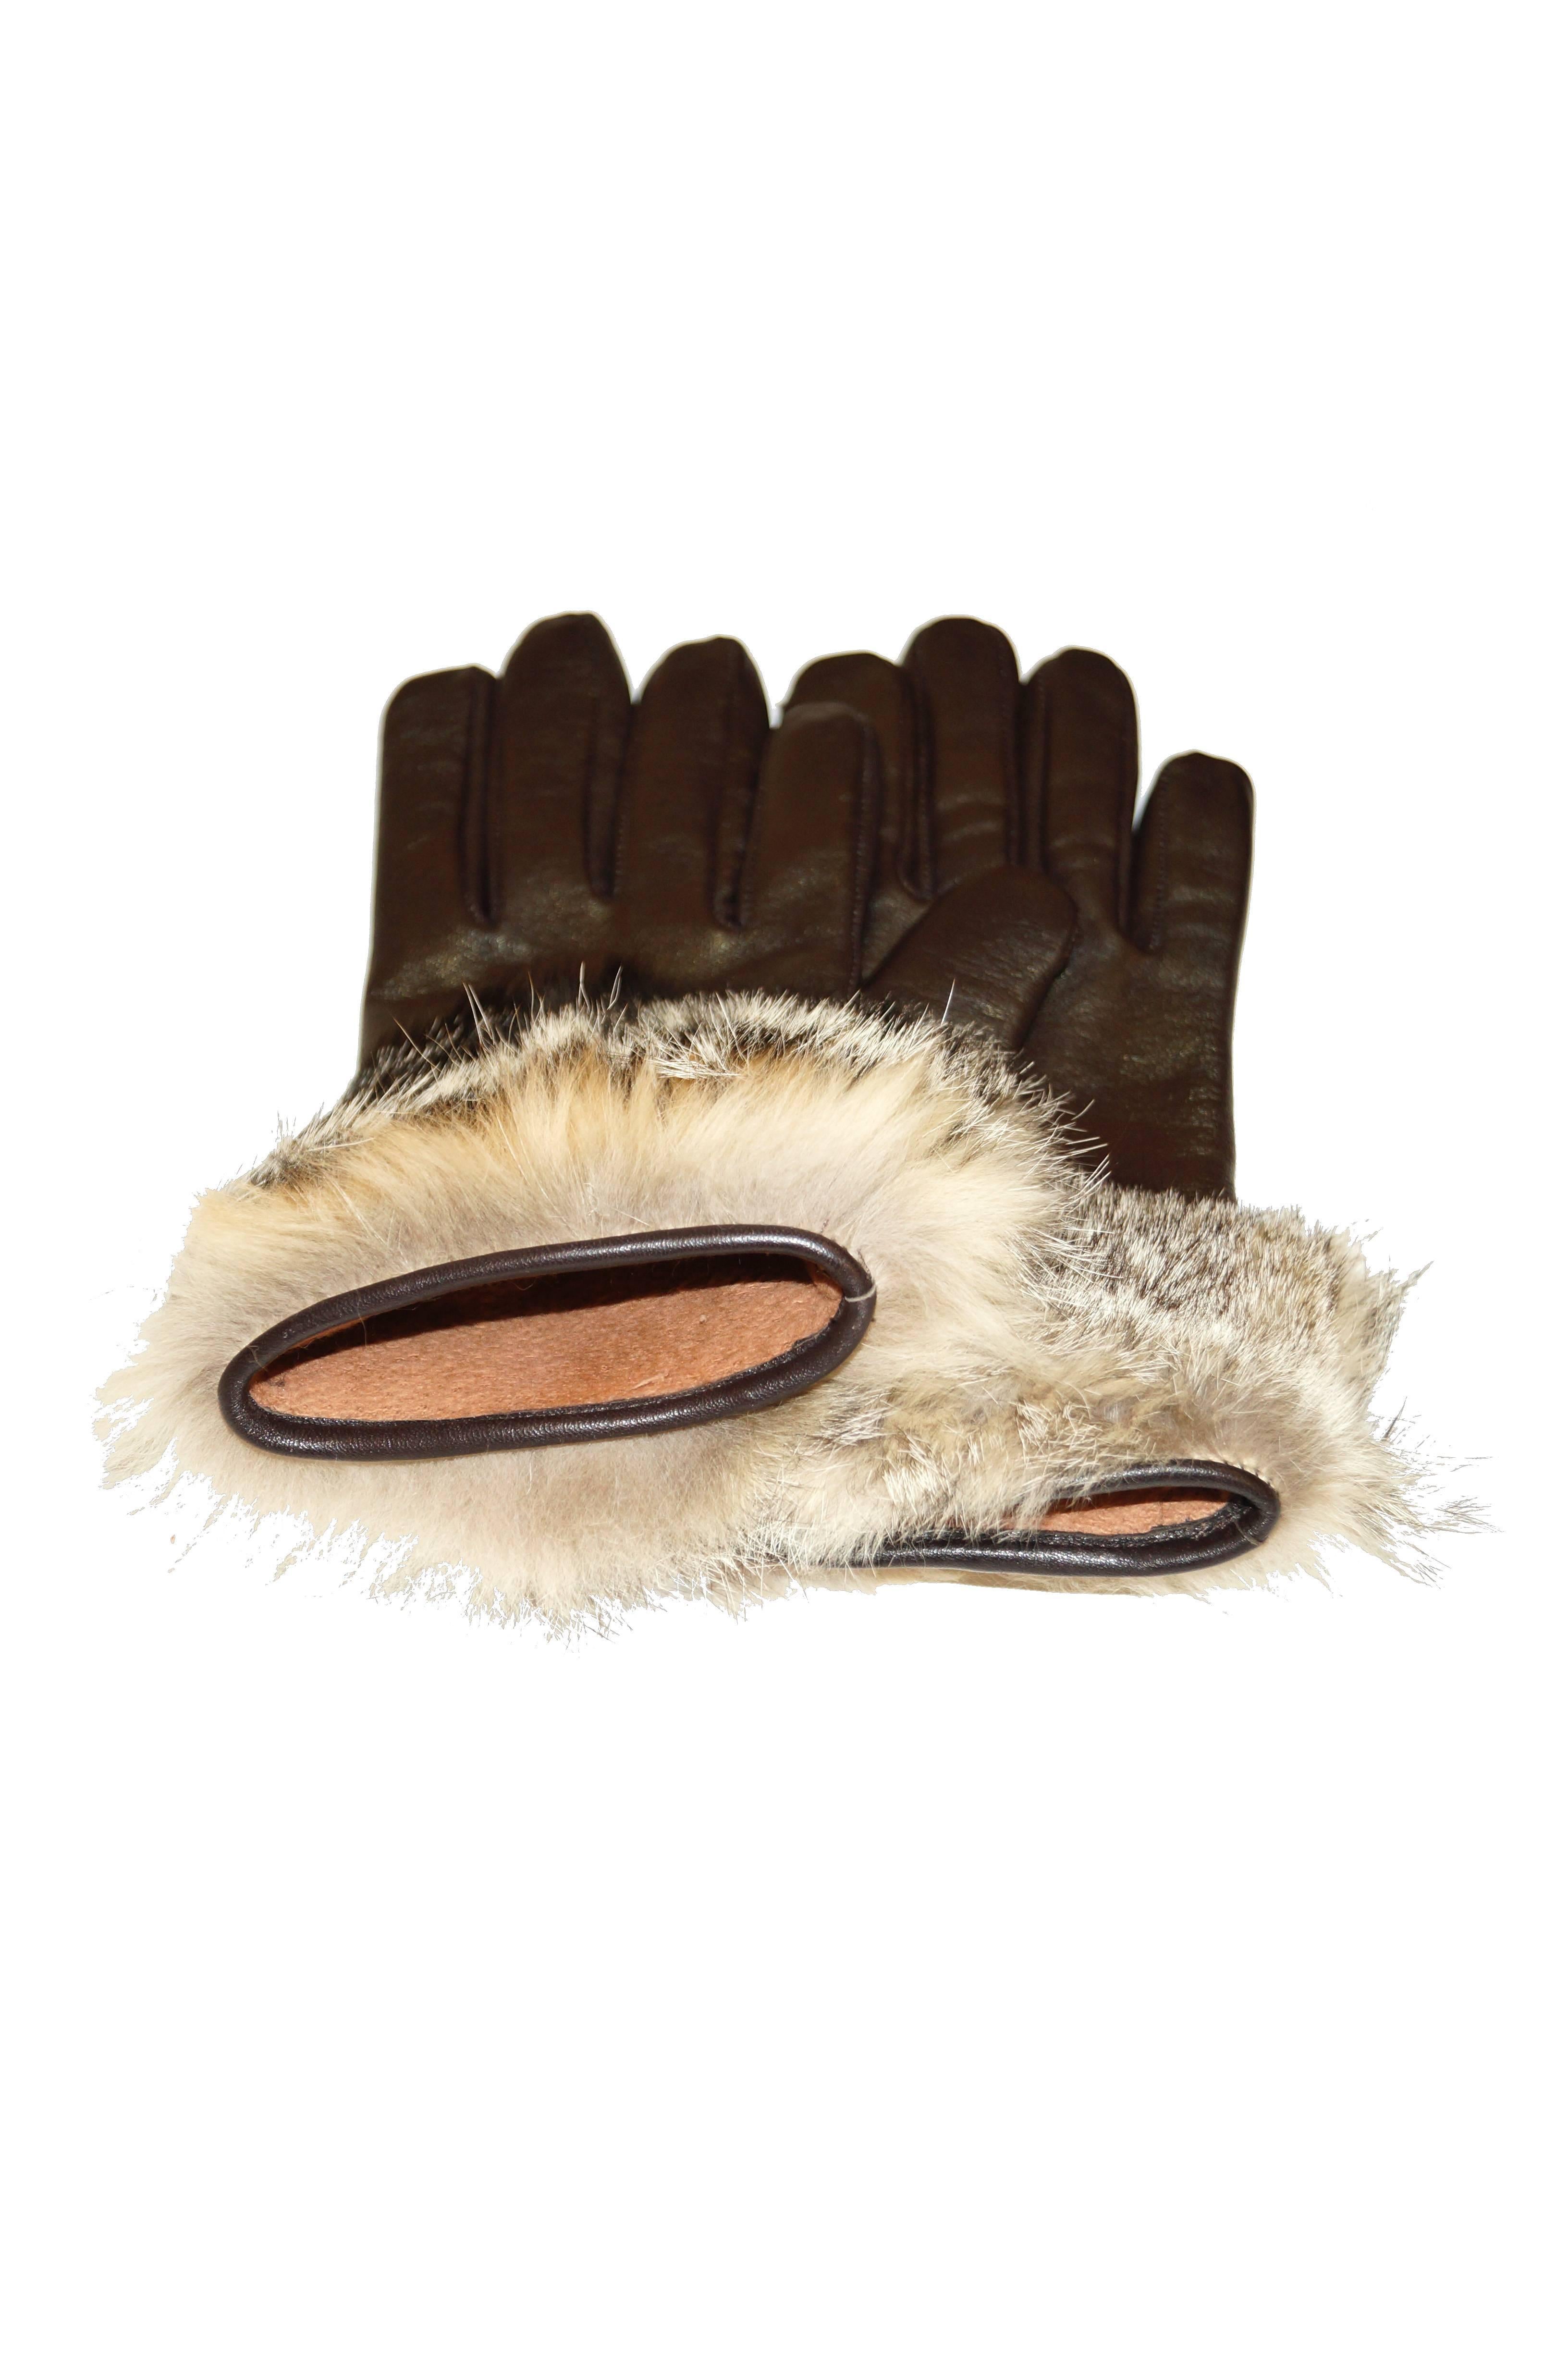 Women's Vintage Italian Brown Leather Gloves with Fur Cuffs